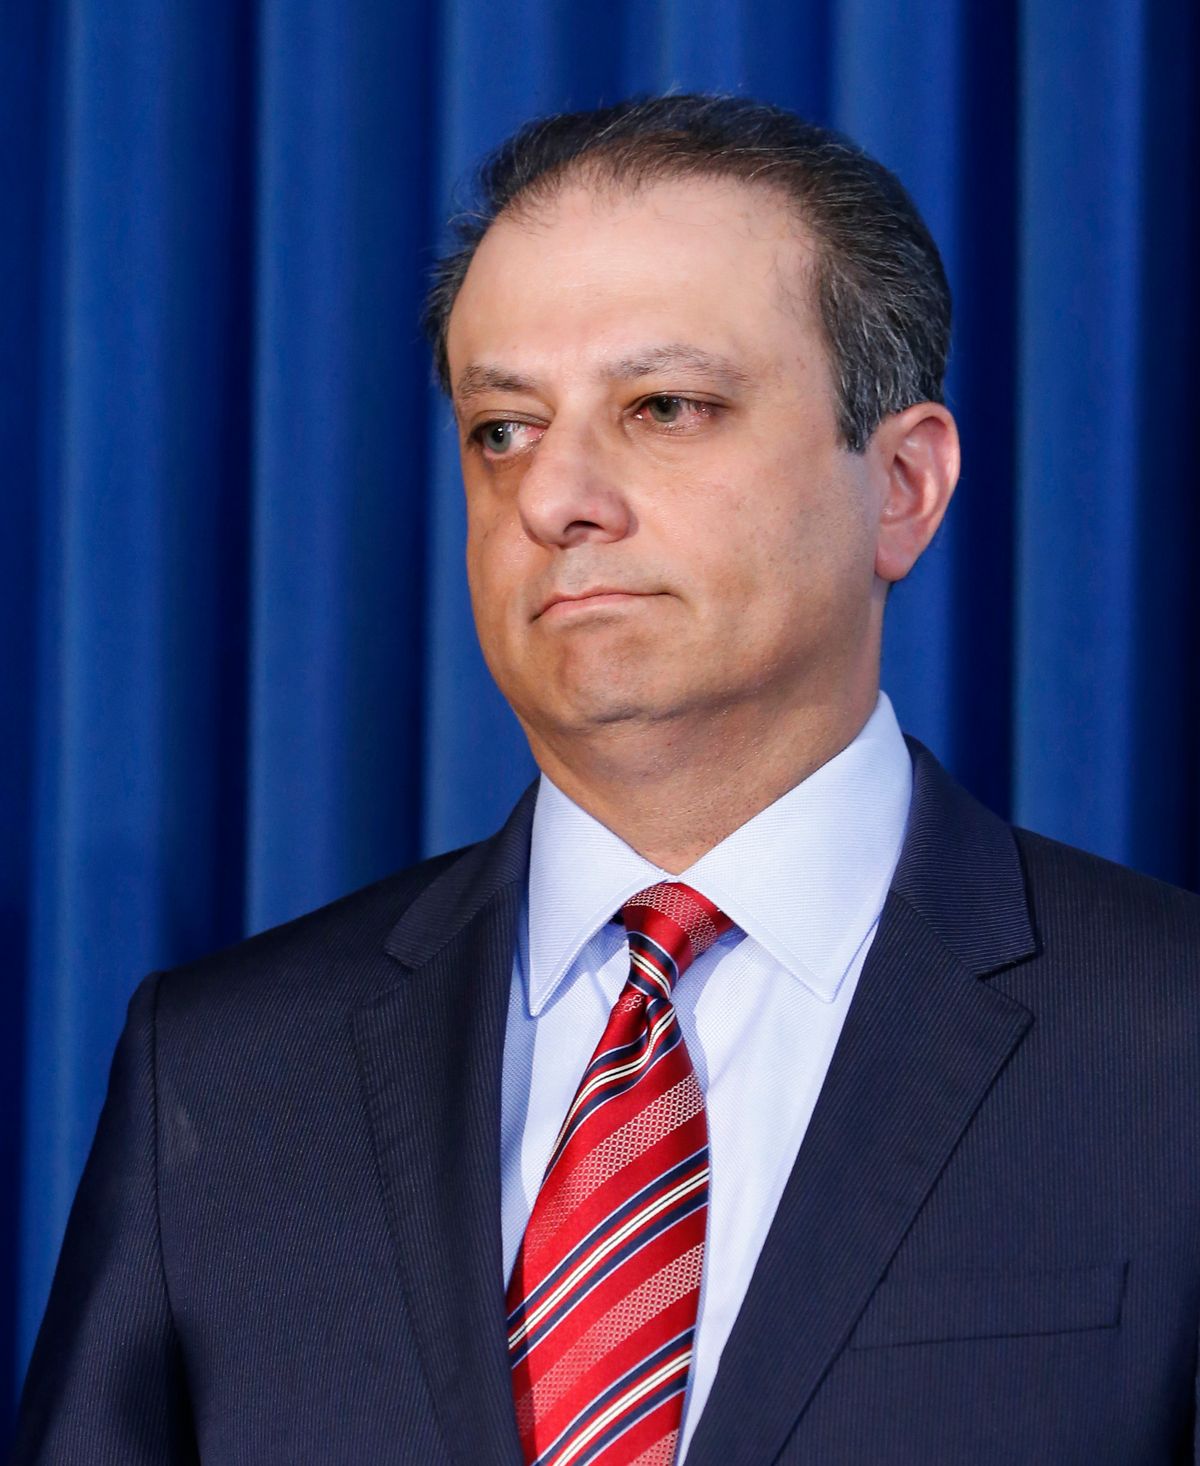 Former U.S. Attorney for the Southern District of New York, Preet Bharara,  was fired after refusing to resign 3.11.17 (AP/Kathy Willens)